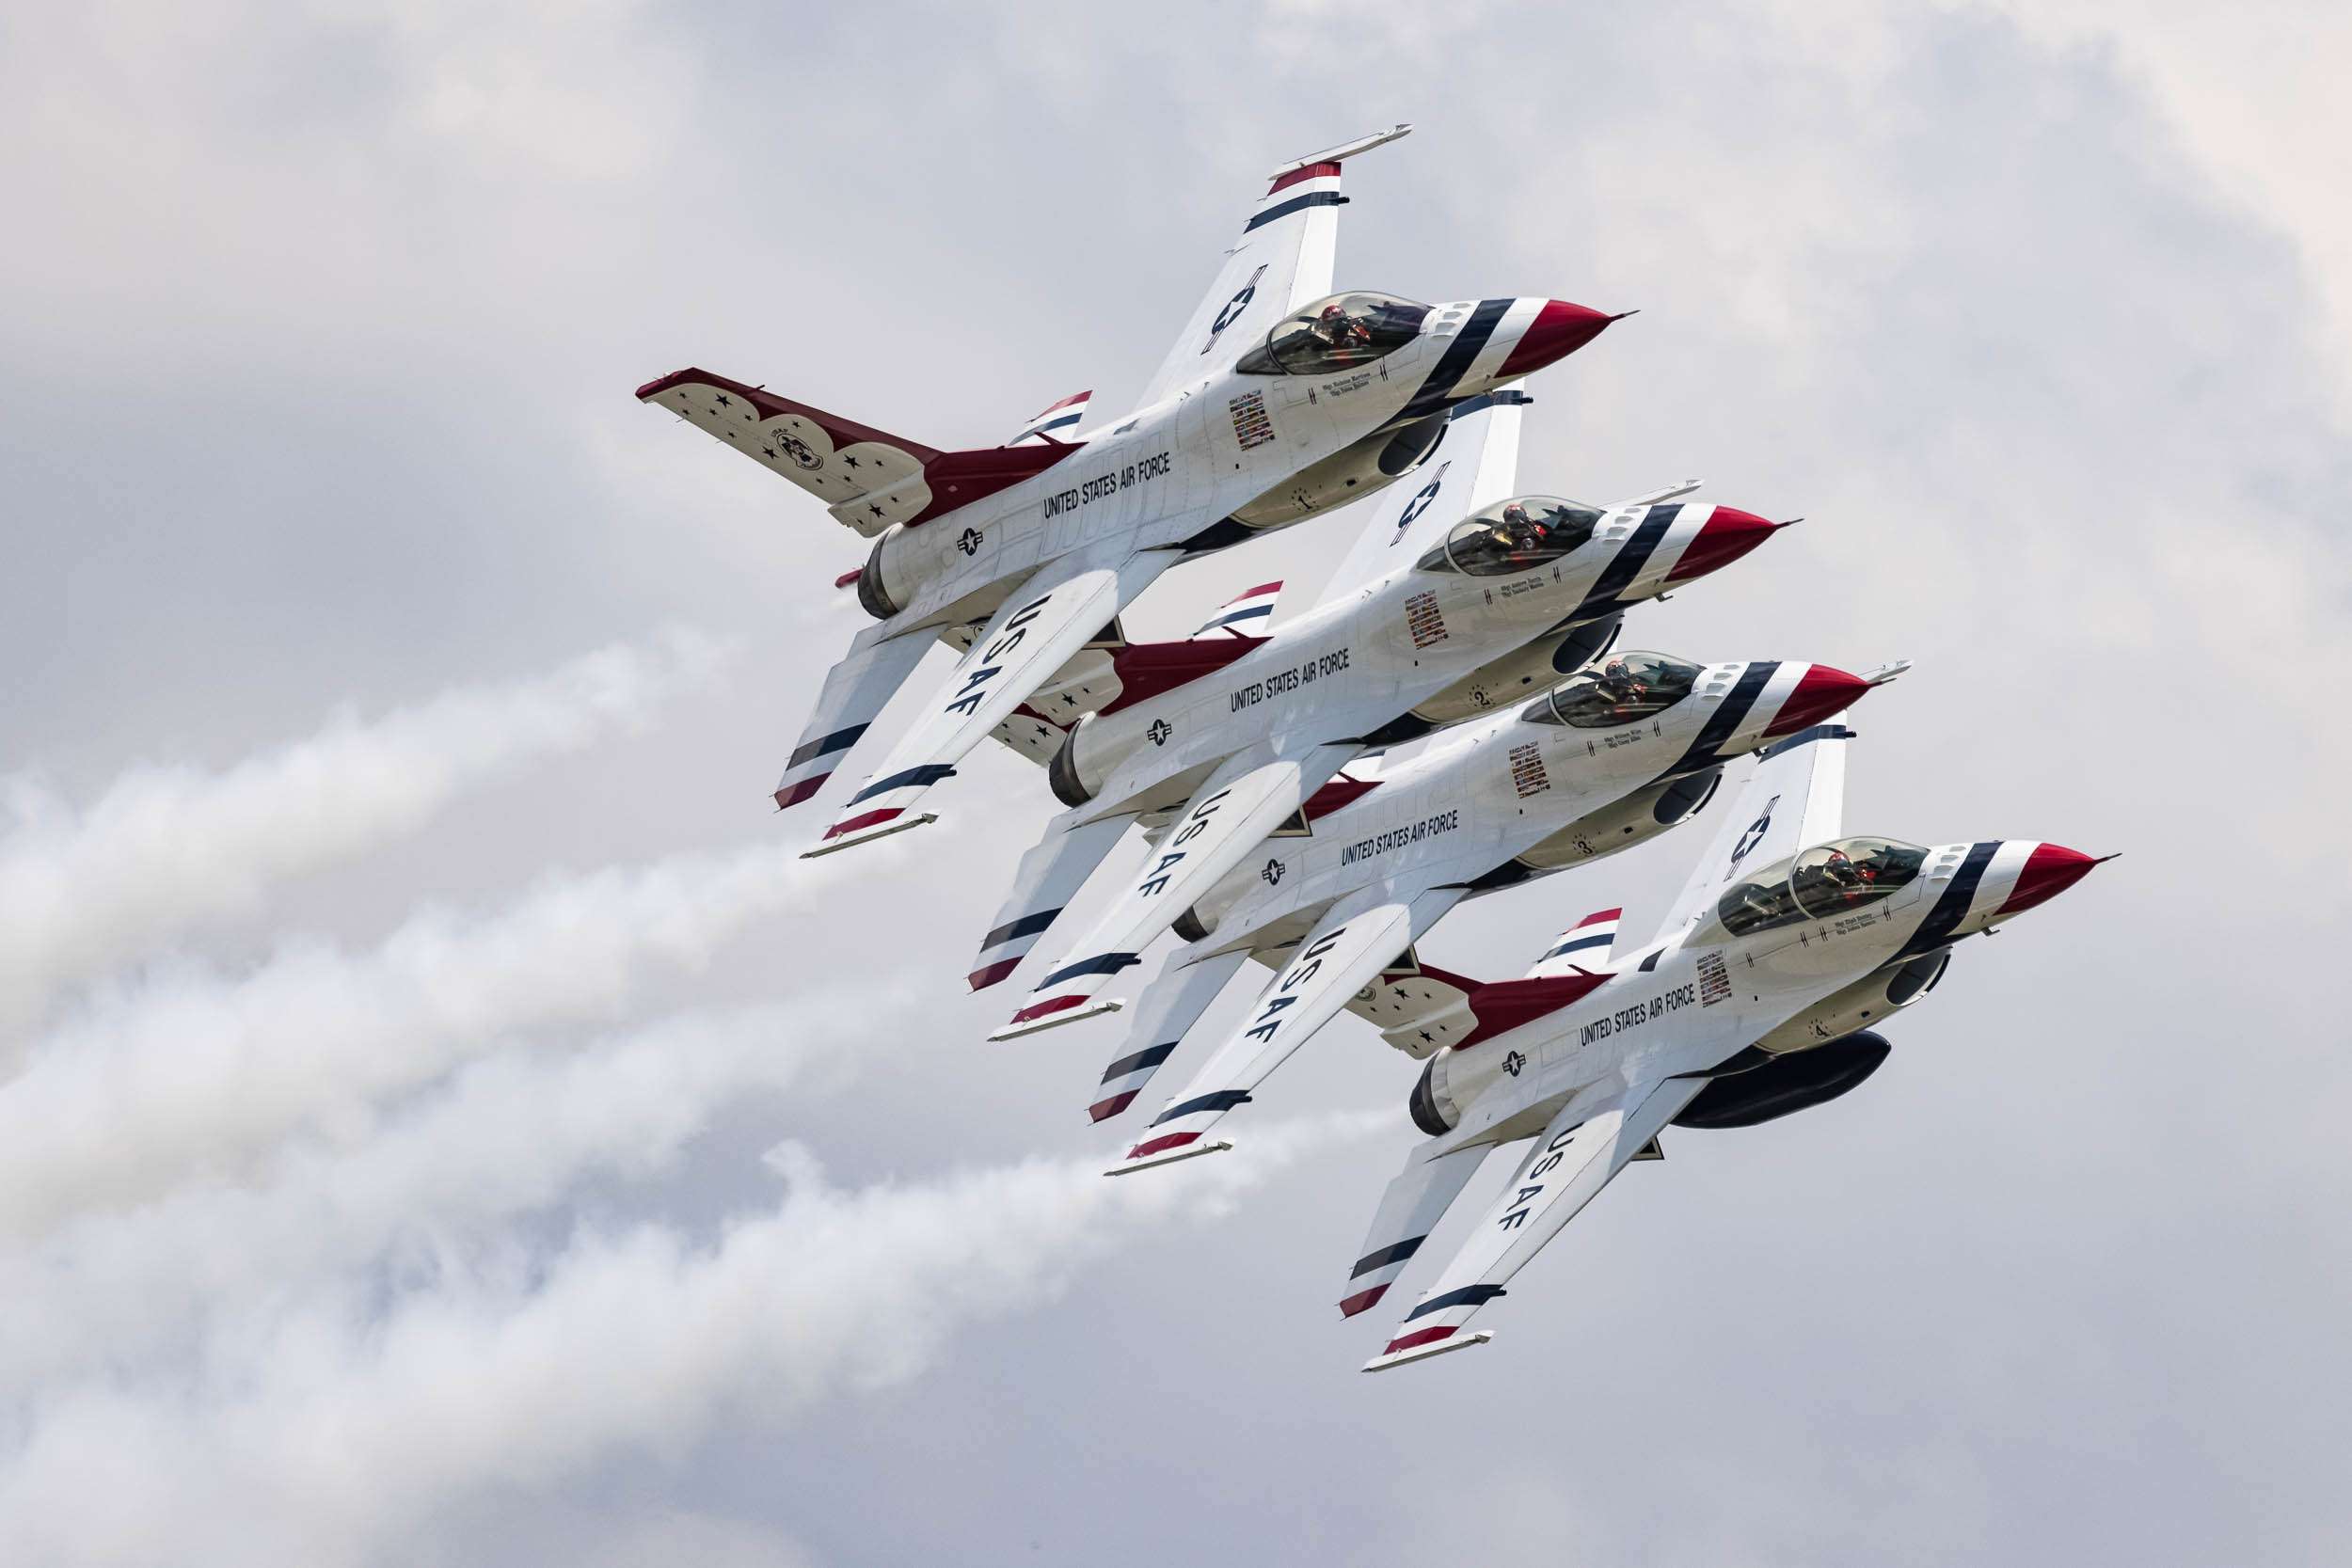 Jets from the US Air Force Thunderbirds pass in tight echelon formation